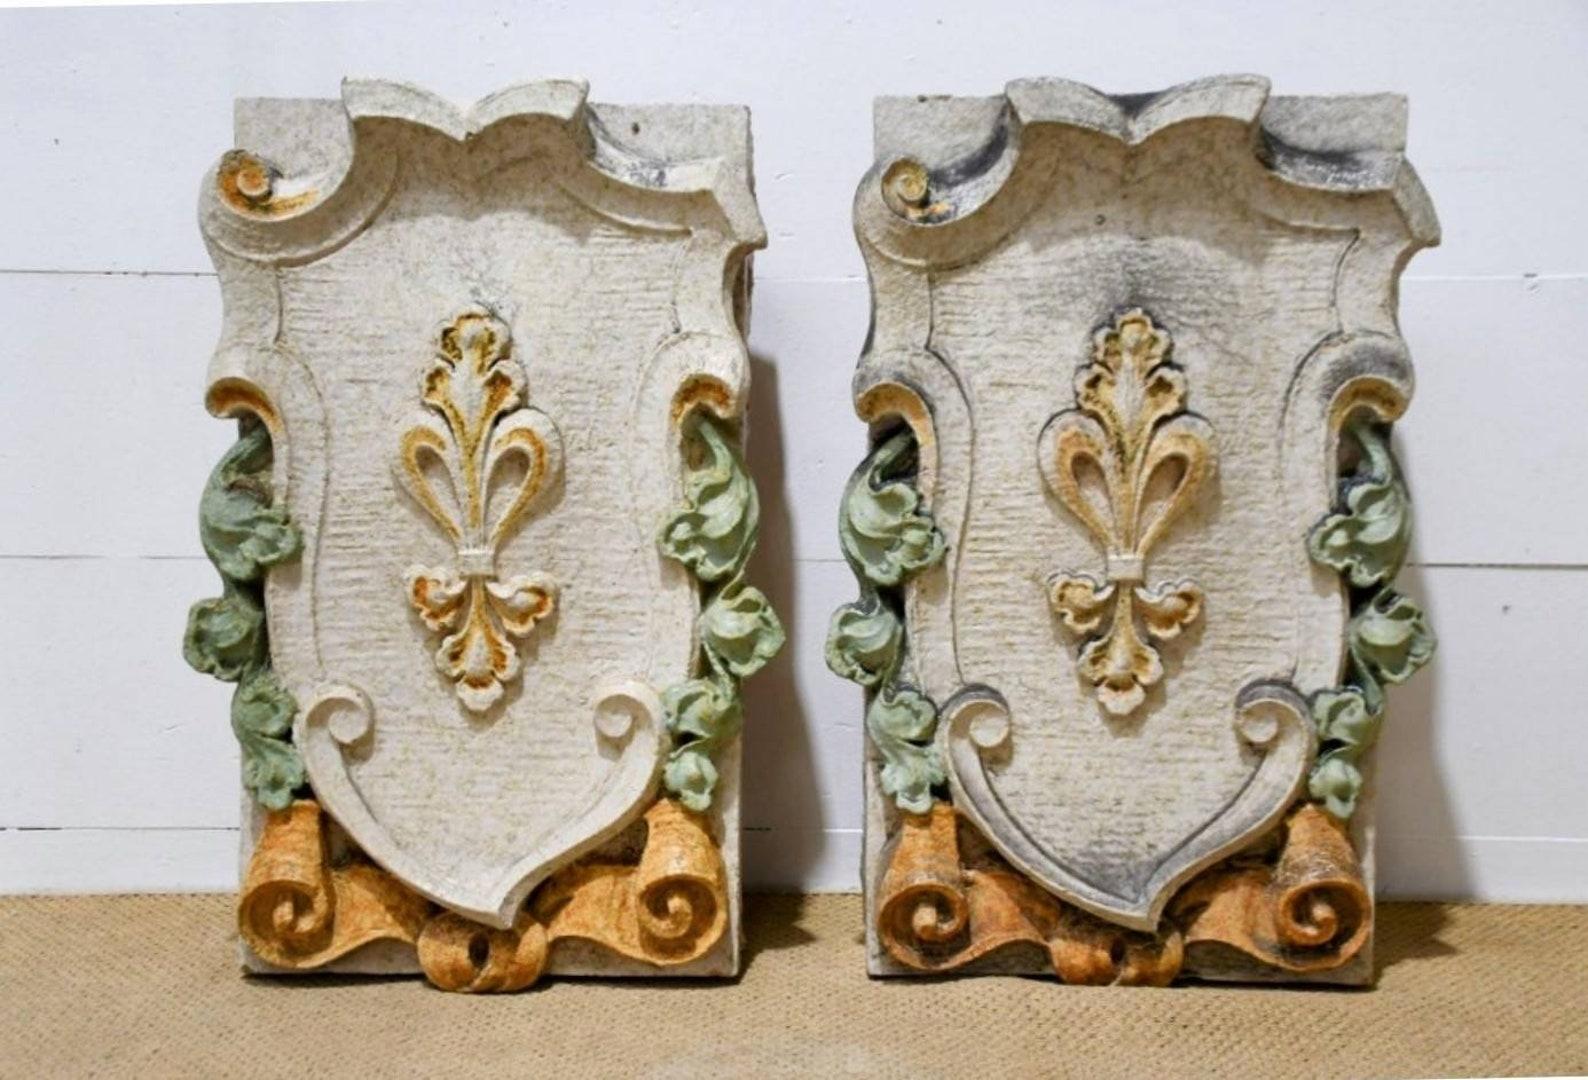 A fabulous pair of large polychrome painted terra cotta architectural salvaged ornamental panel fragments / decorative building elements from St. Louis, Missouri.

The artistic, sculptural design makes for a fascinating decorative object that's